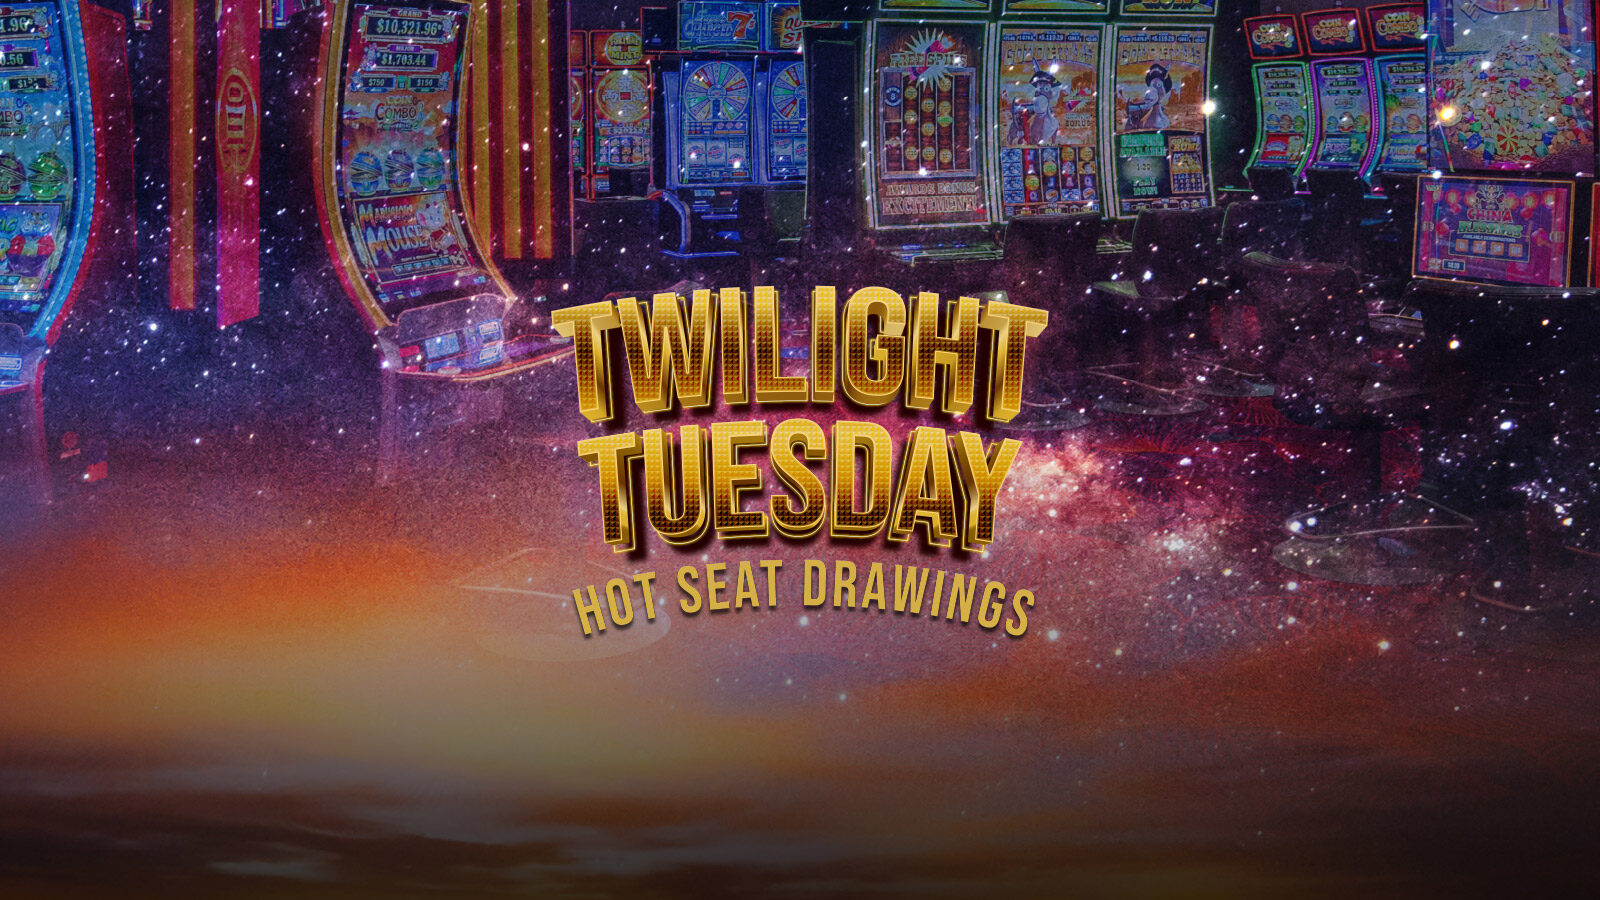 Twilight Tuesday Hot Seat Drawings